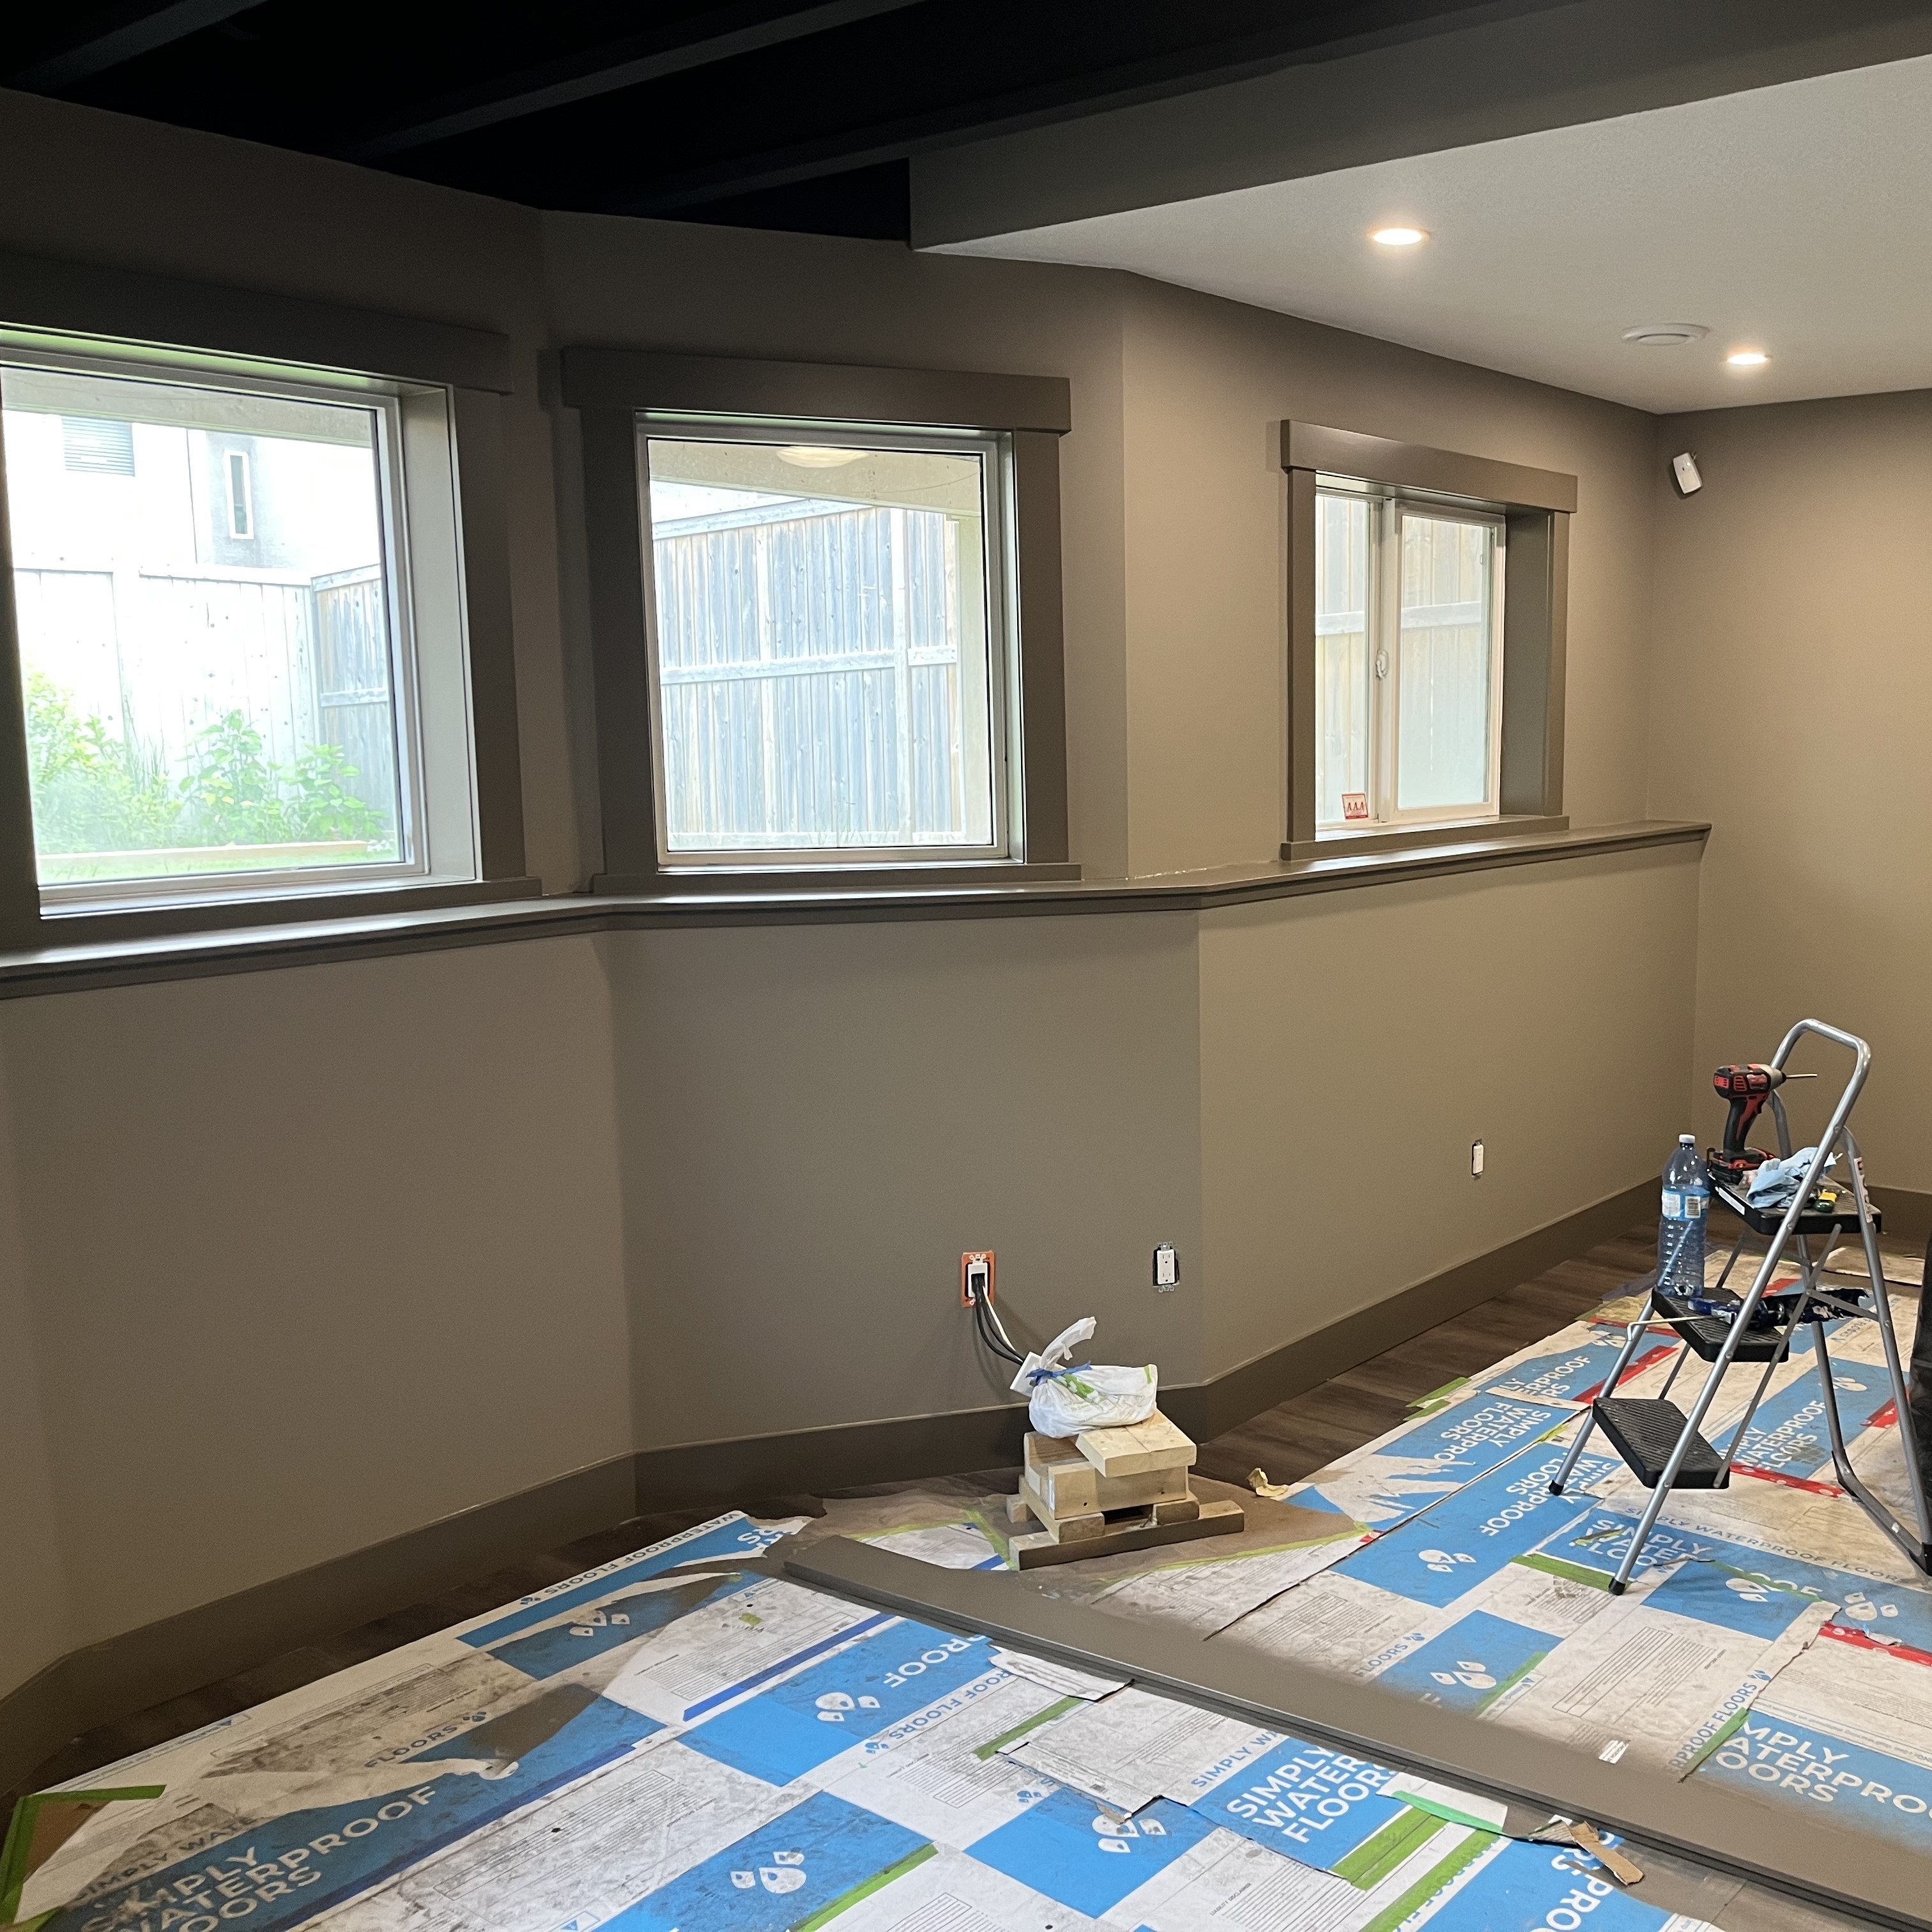 Calgary painting services